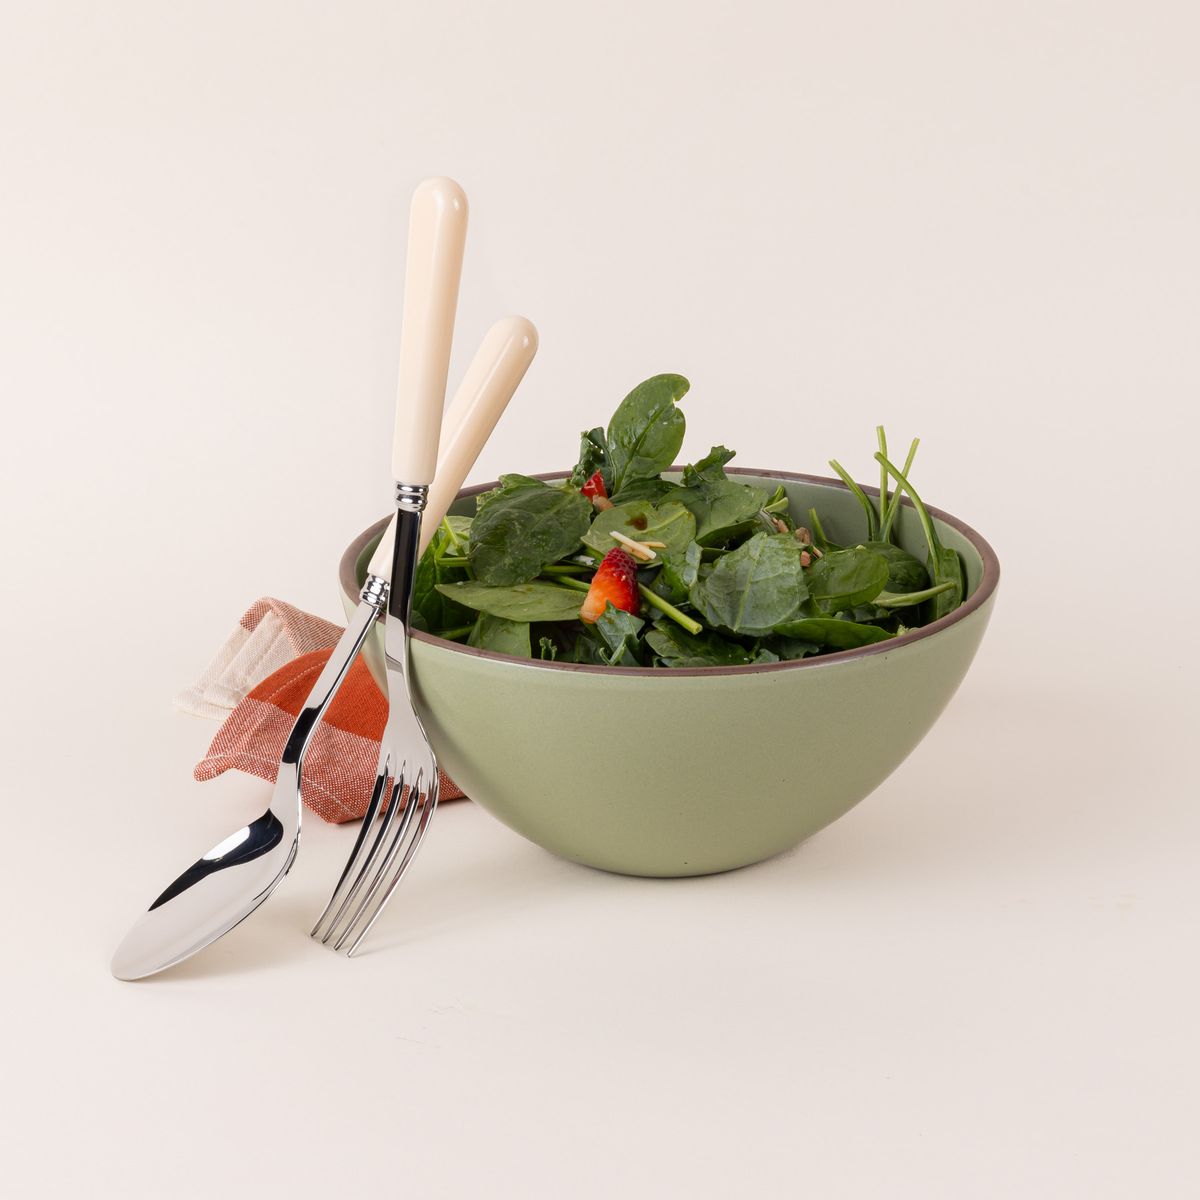 A serving size spoon and fork in a shiny steel with a matte cream handle leans against a sage green ceramic bowl filled with salad